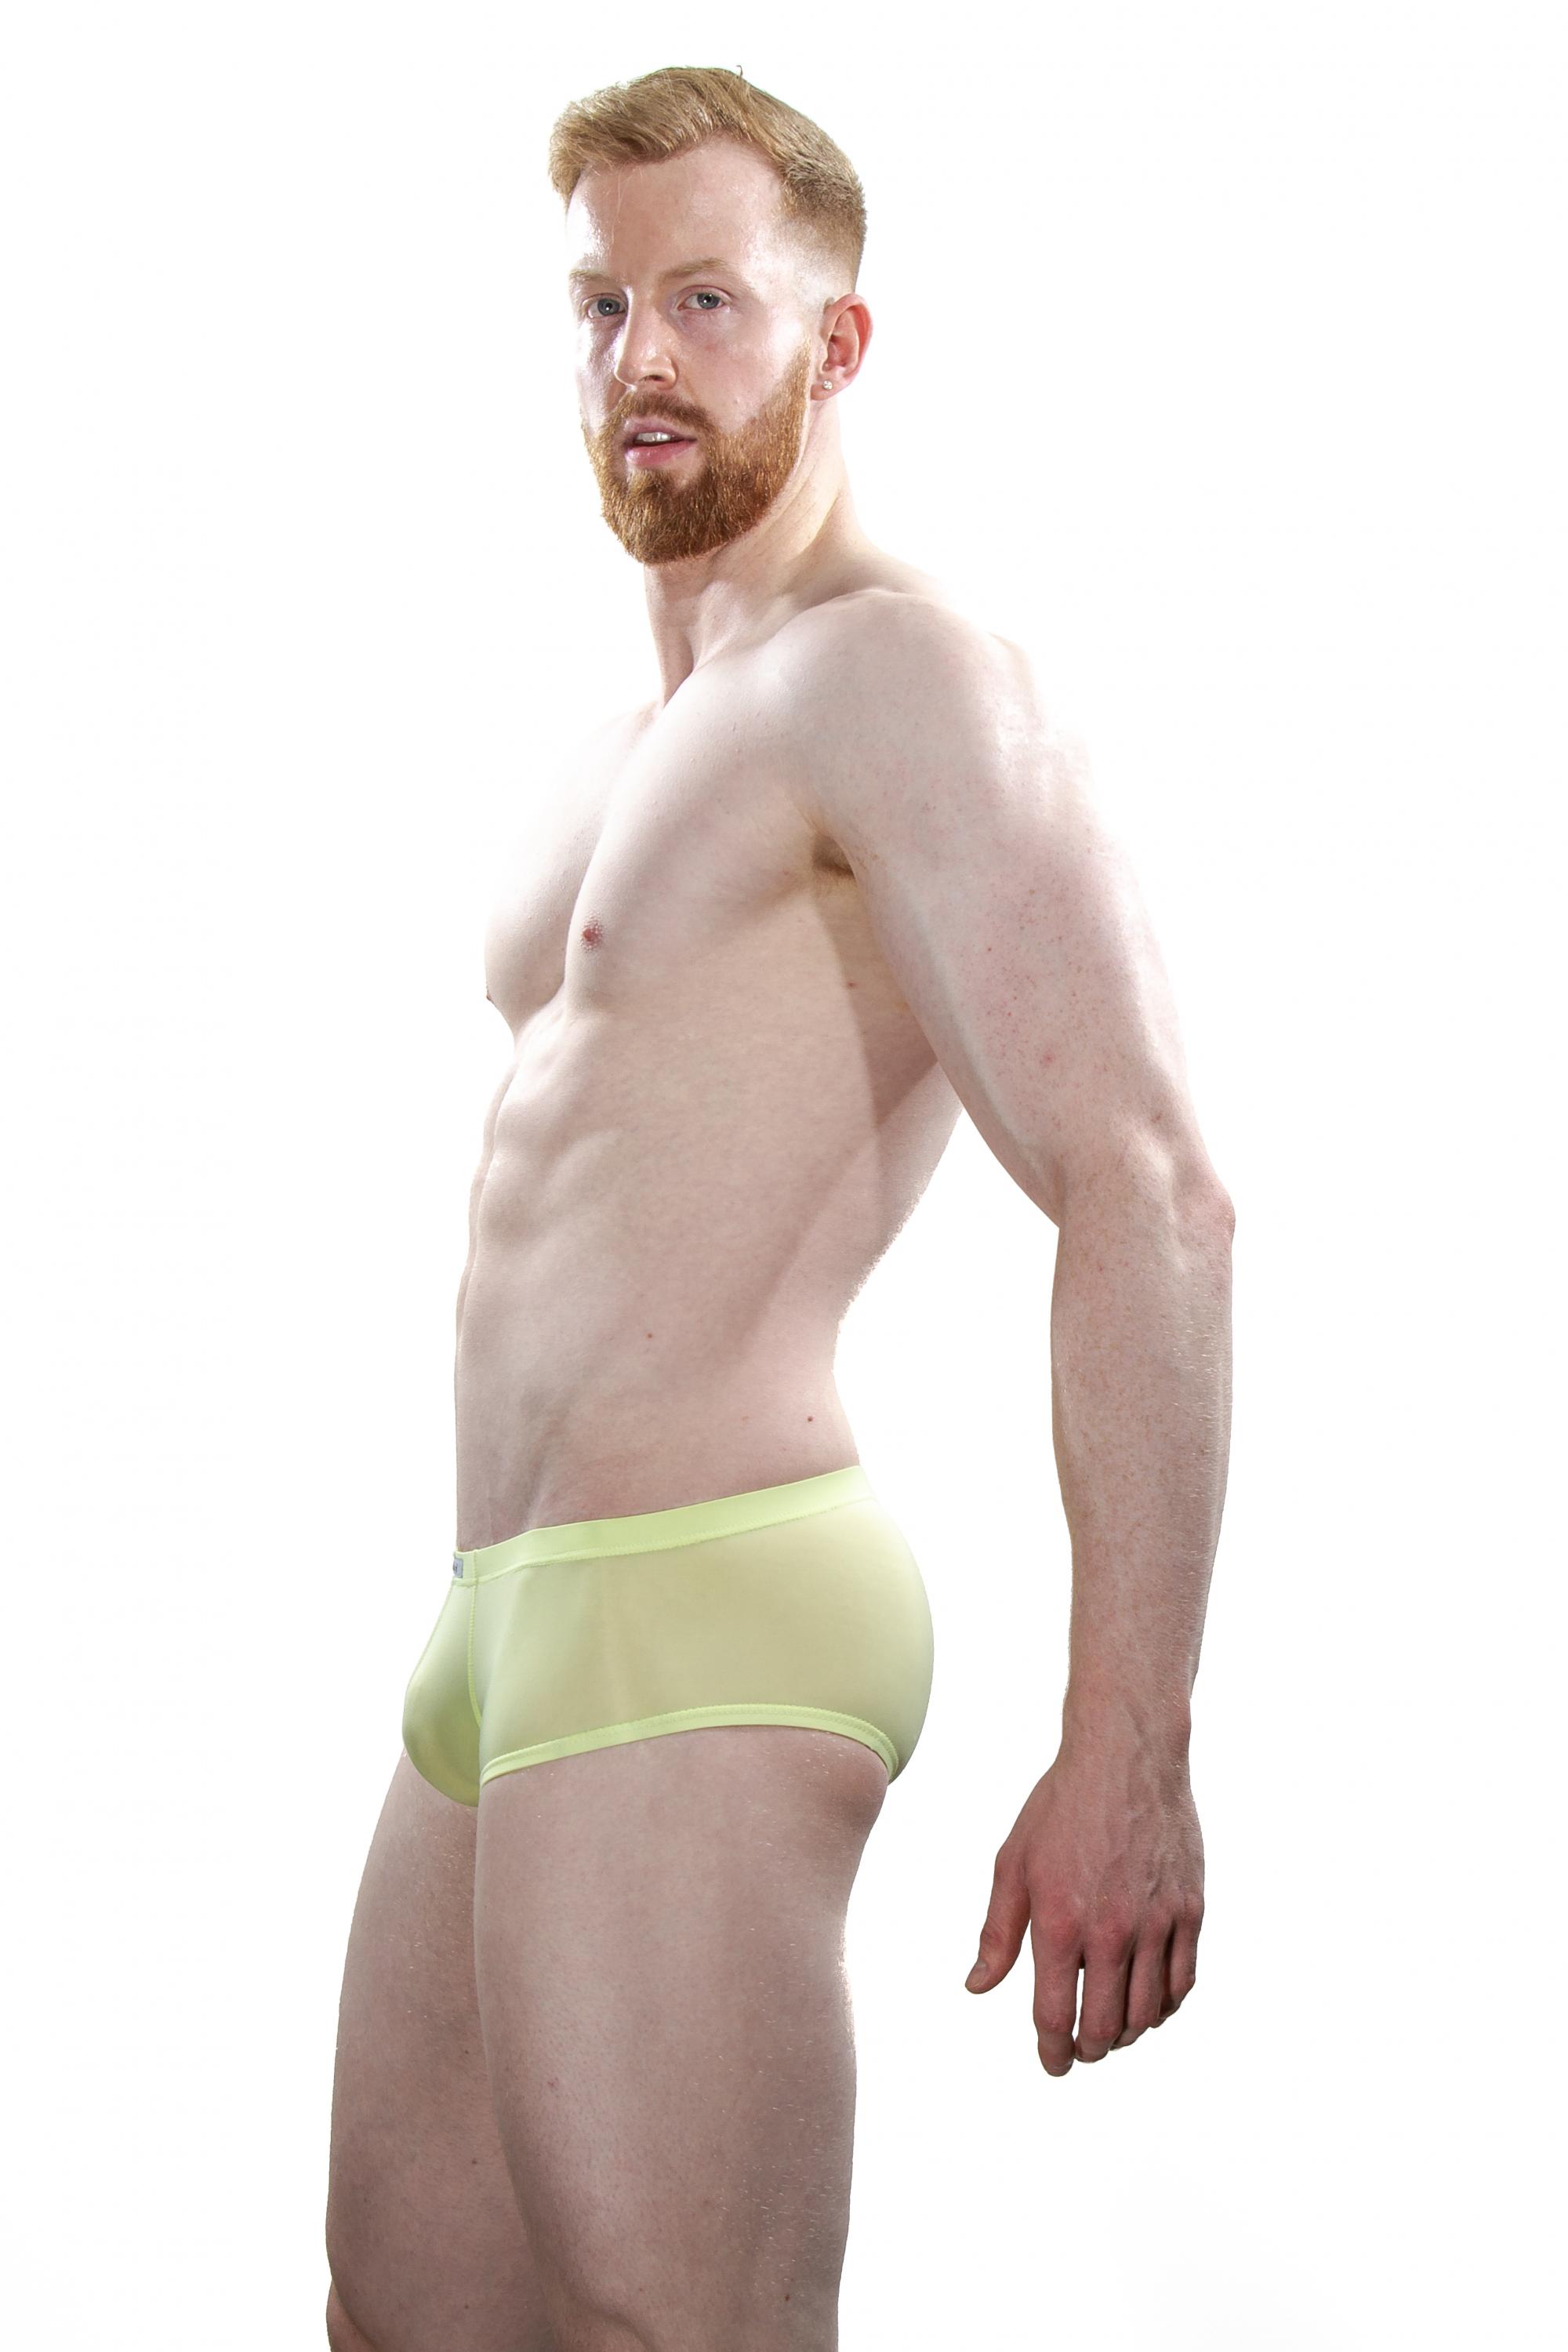 Celebrate your masculine physique with this defining microfiber brief by AlexanderS. Made from a barley there sheer fabric and contoured to hug your body.